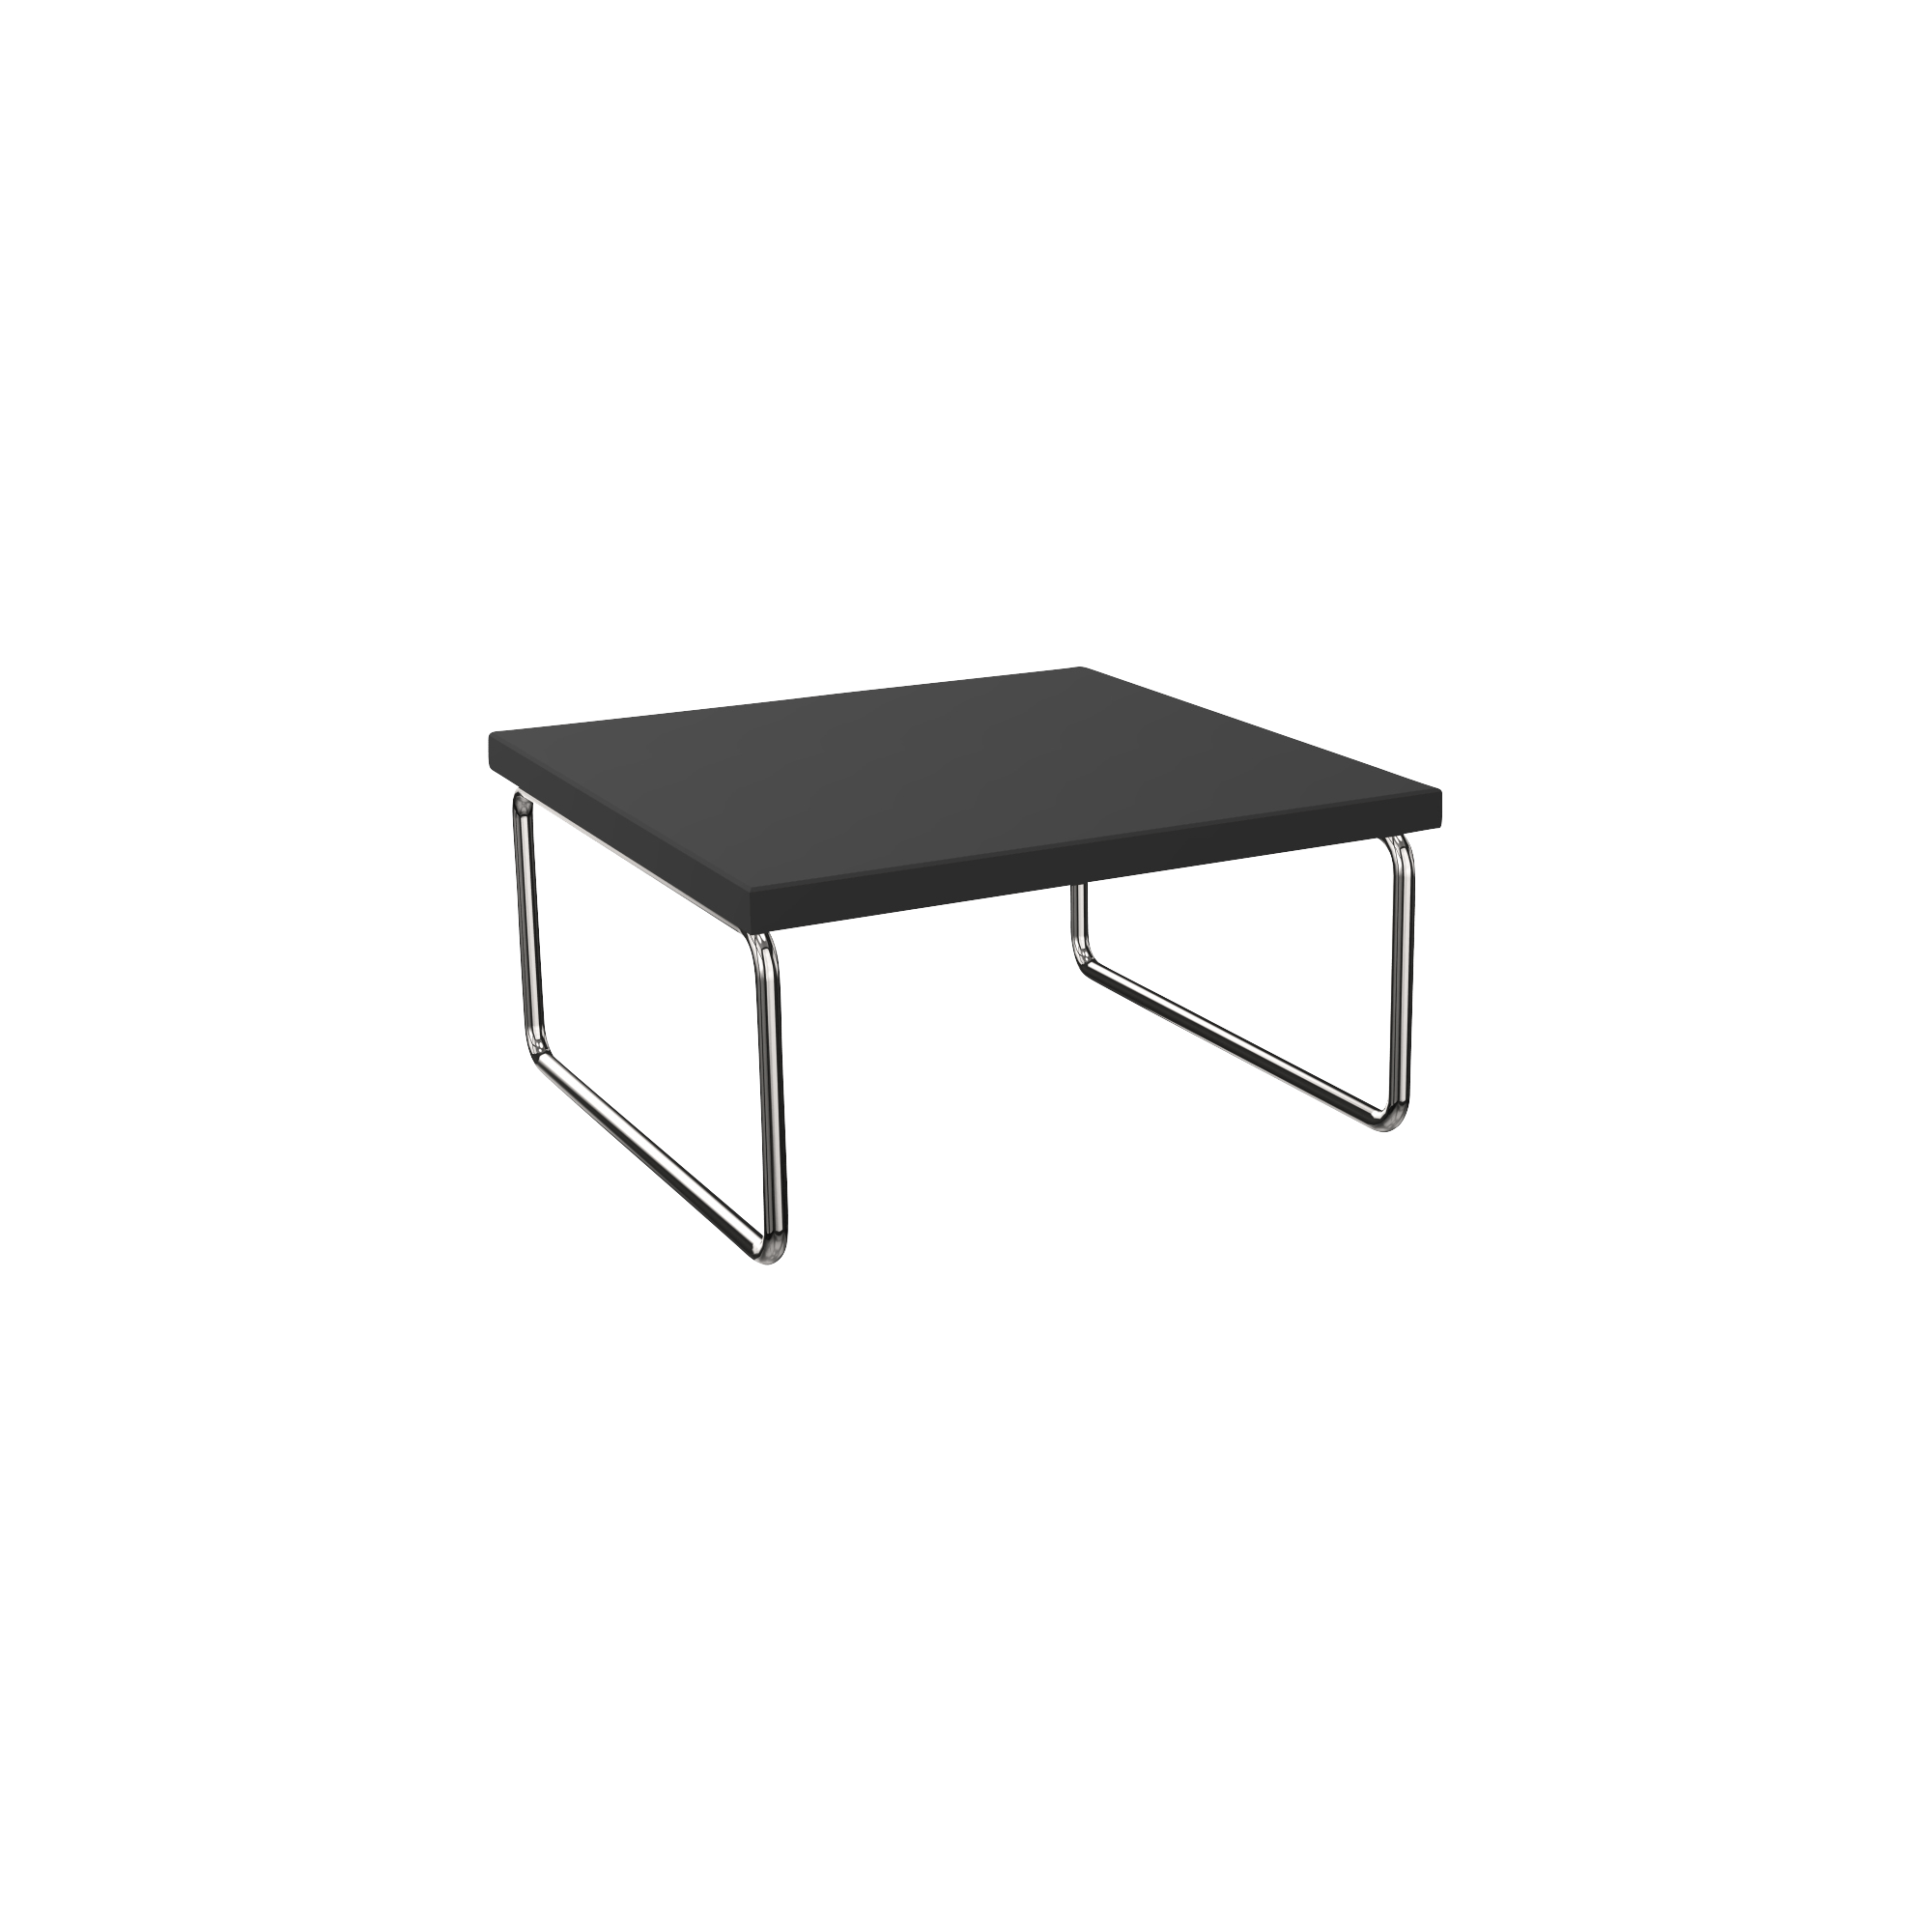 Square office coffee table with two chrome legs